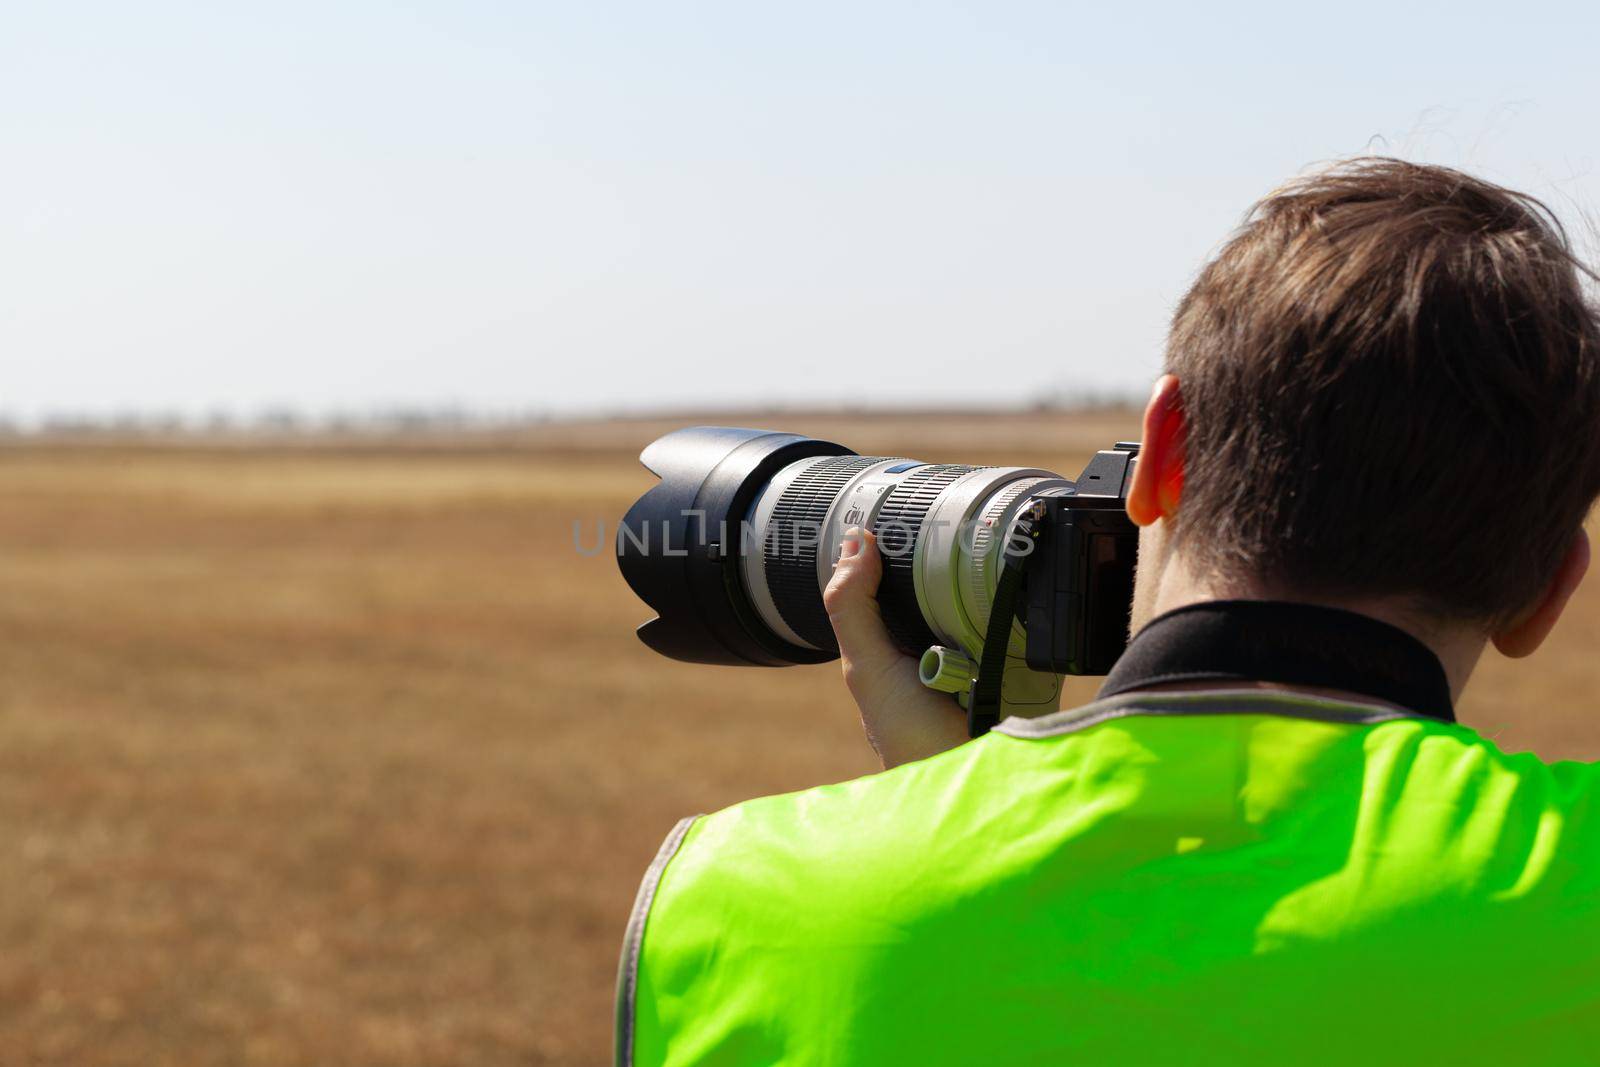 Man in yellow vest does plane spotting at the airport, close up